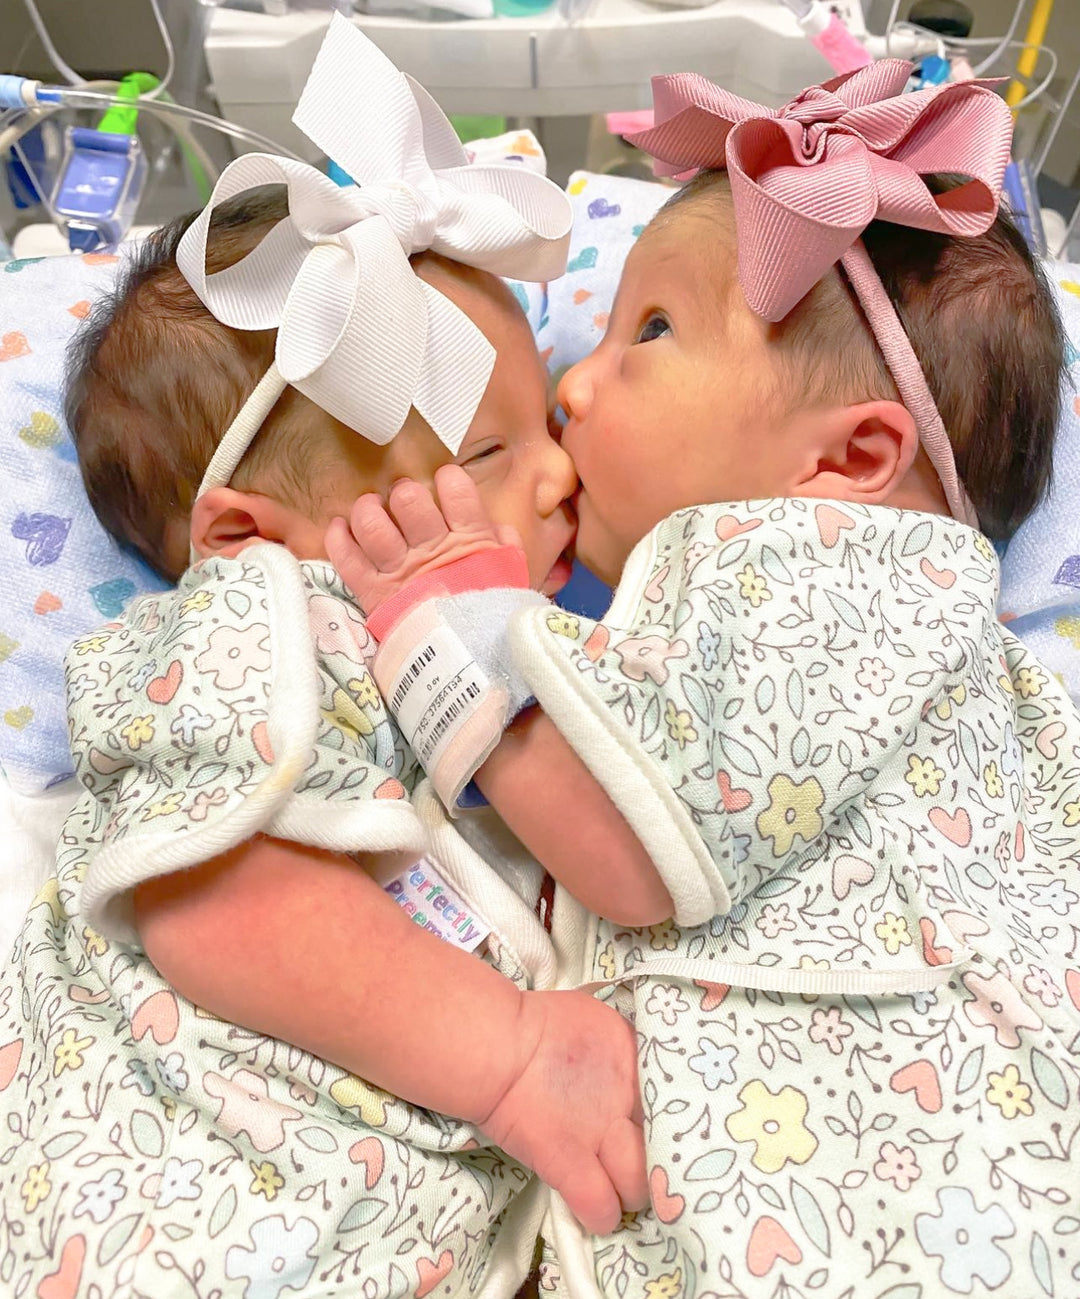 "Why Choose The Preemie Store: Your Trusted Partner for Preemie Essentials"